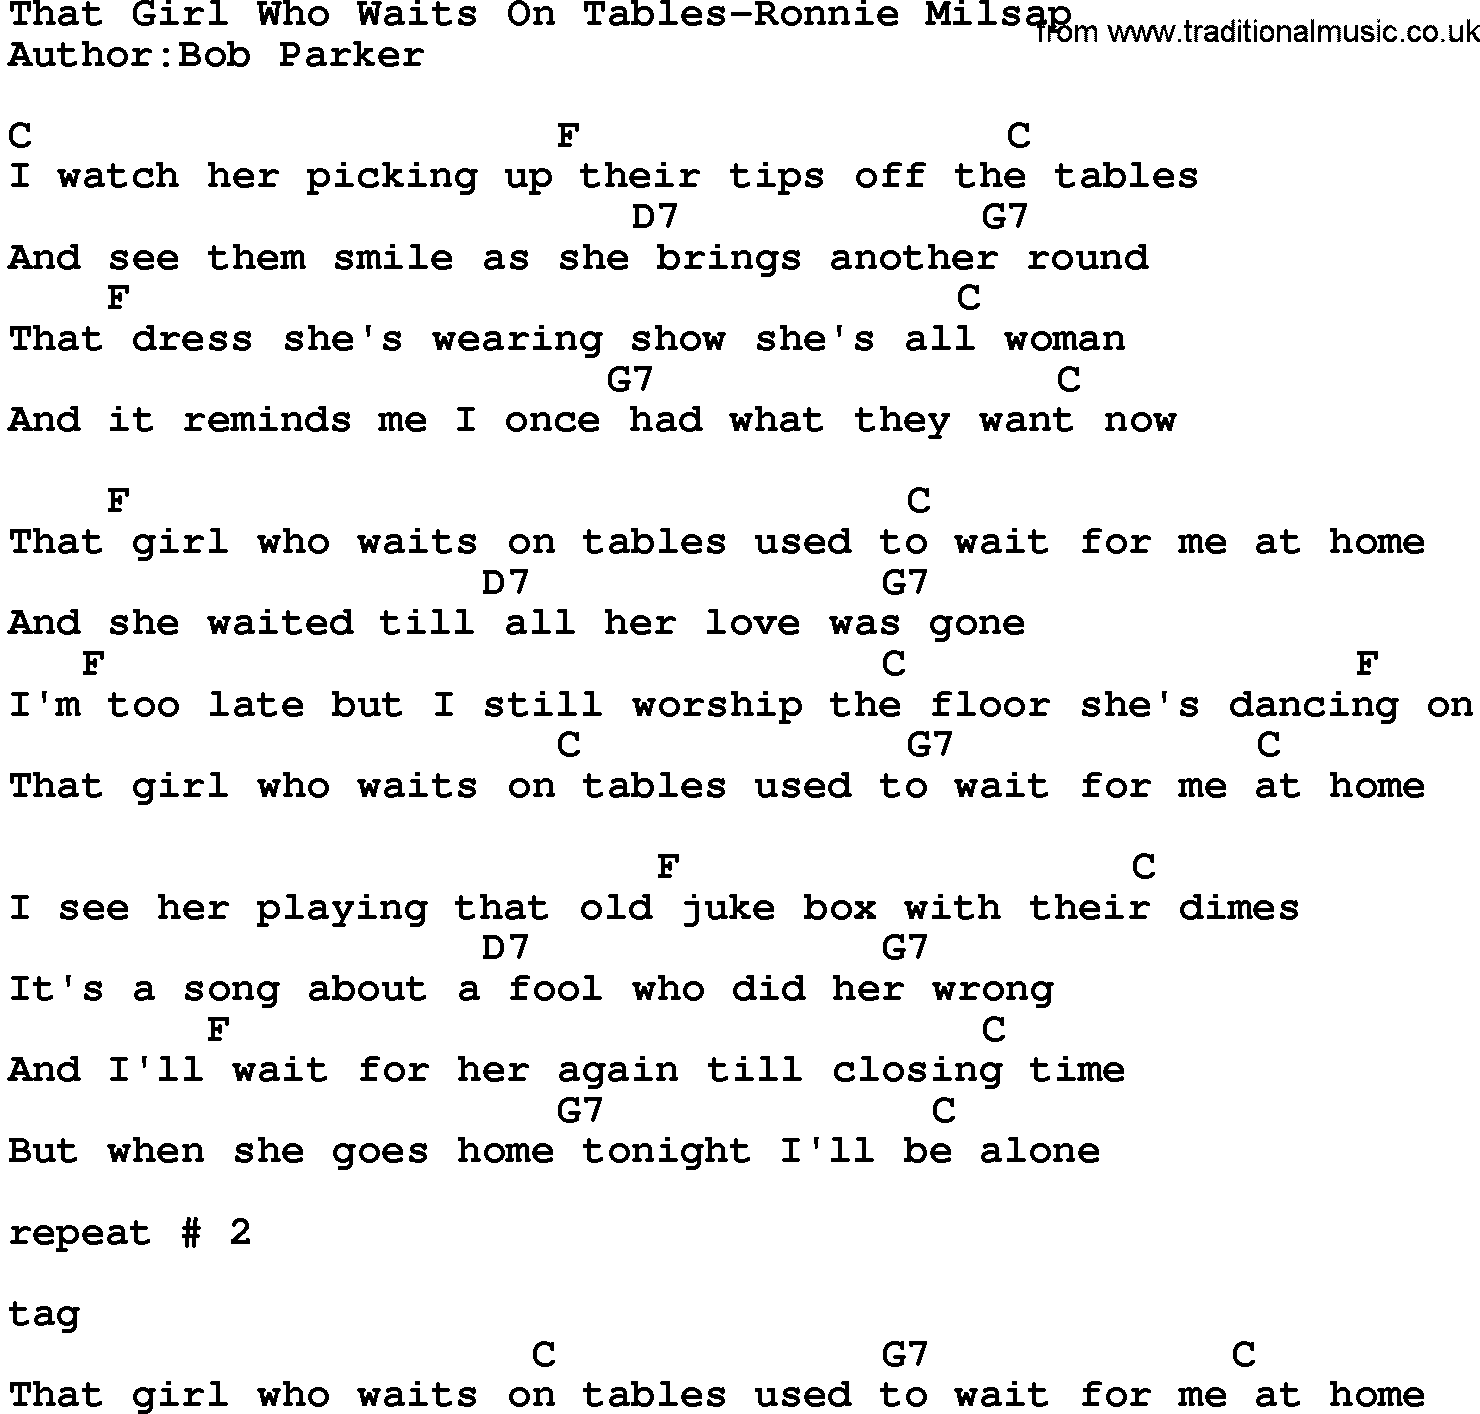 Country music song: That Girl Who Waits On Tables-Ronnie Milsap lyrics and chords